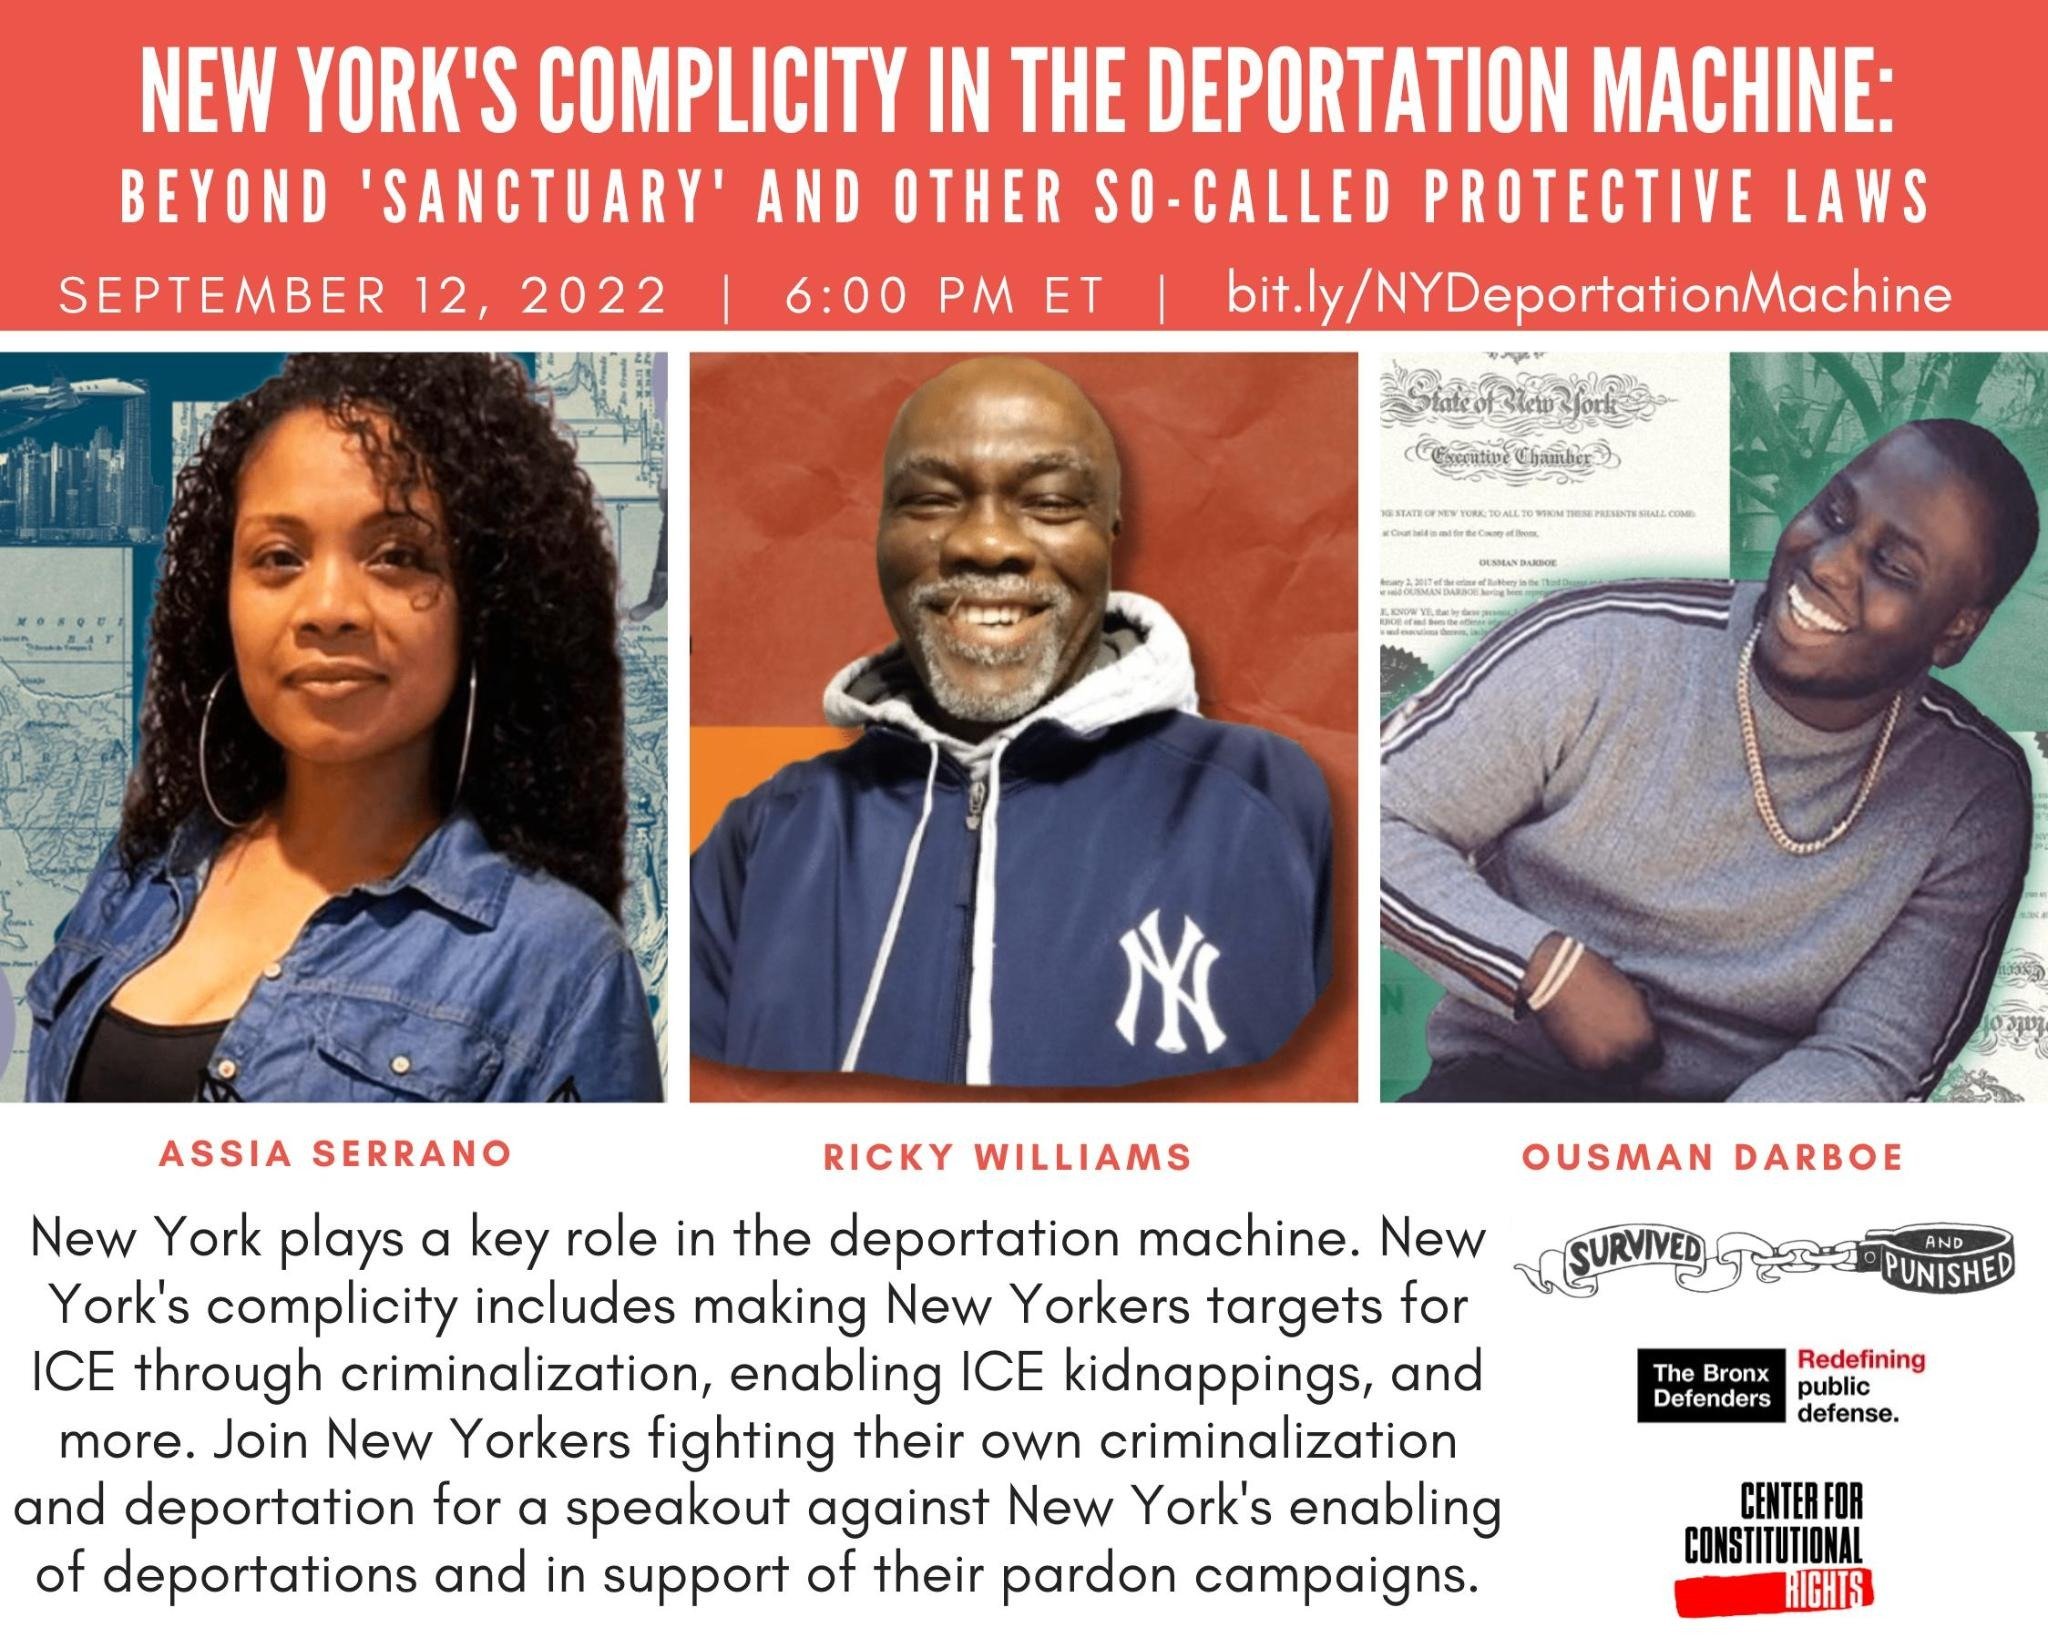 In white text on a red background reads, “ New York's Complicity in the Deportation Machine: Beyond ‘Sanctuary’ and other so-called Protective laws September 12, 2022 | 6:00 PM ET | bit.ly/NYDeportationMachine” Below are photos of three individuals below the photos are their names reading from left to right in red writing on a white background reads: Assia Serrano, Ricky Williams, Ousman Darboe. Below in black writing on a white background reads “New York plays a key role in the deportation machine. New York’s complicity includes making New Yorkers targets for ICE through criminalization, enabling ICE kidnappings, & more. Join New Yorkers fighting for their own criminalization & deportation for a speakout against New York’s enabling of deportations, & in support of their pardon campaigns.” to the left are logos for “Survived and Punished”, The Bronx Defenders” and “Center for Constitutional Rights”